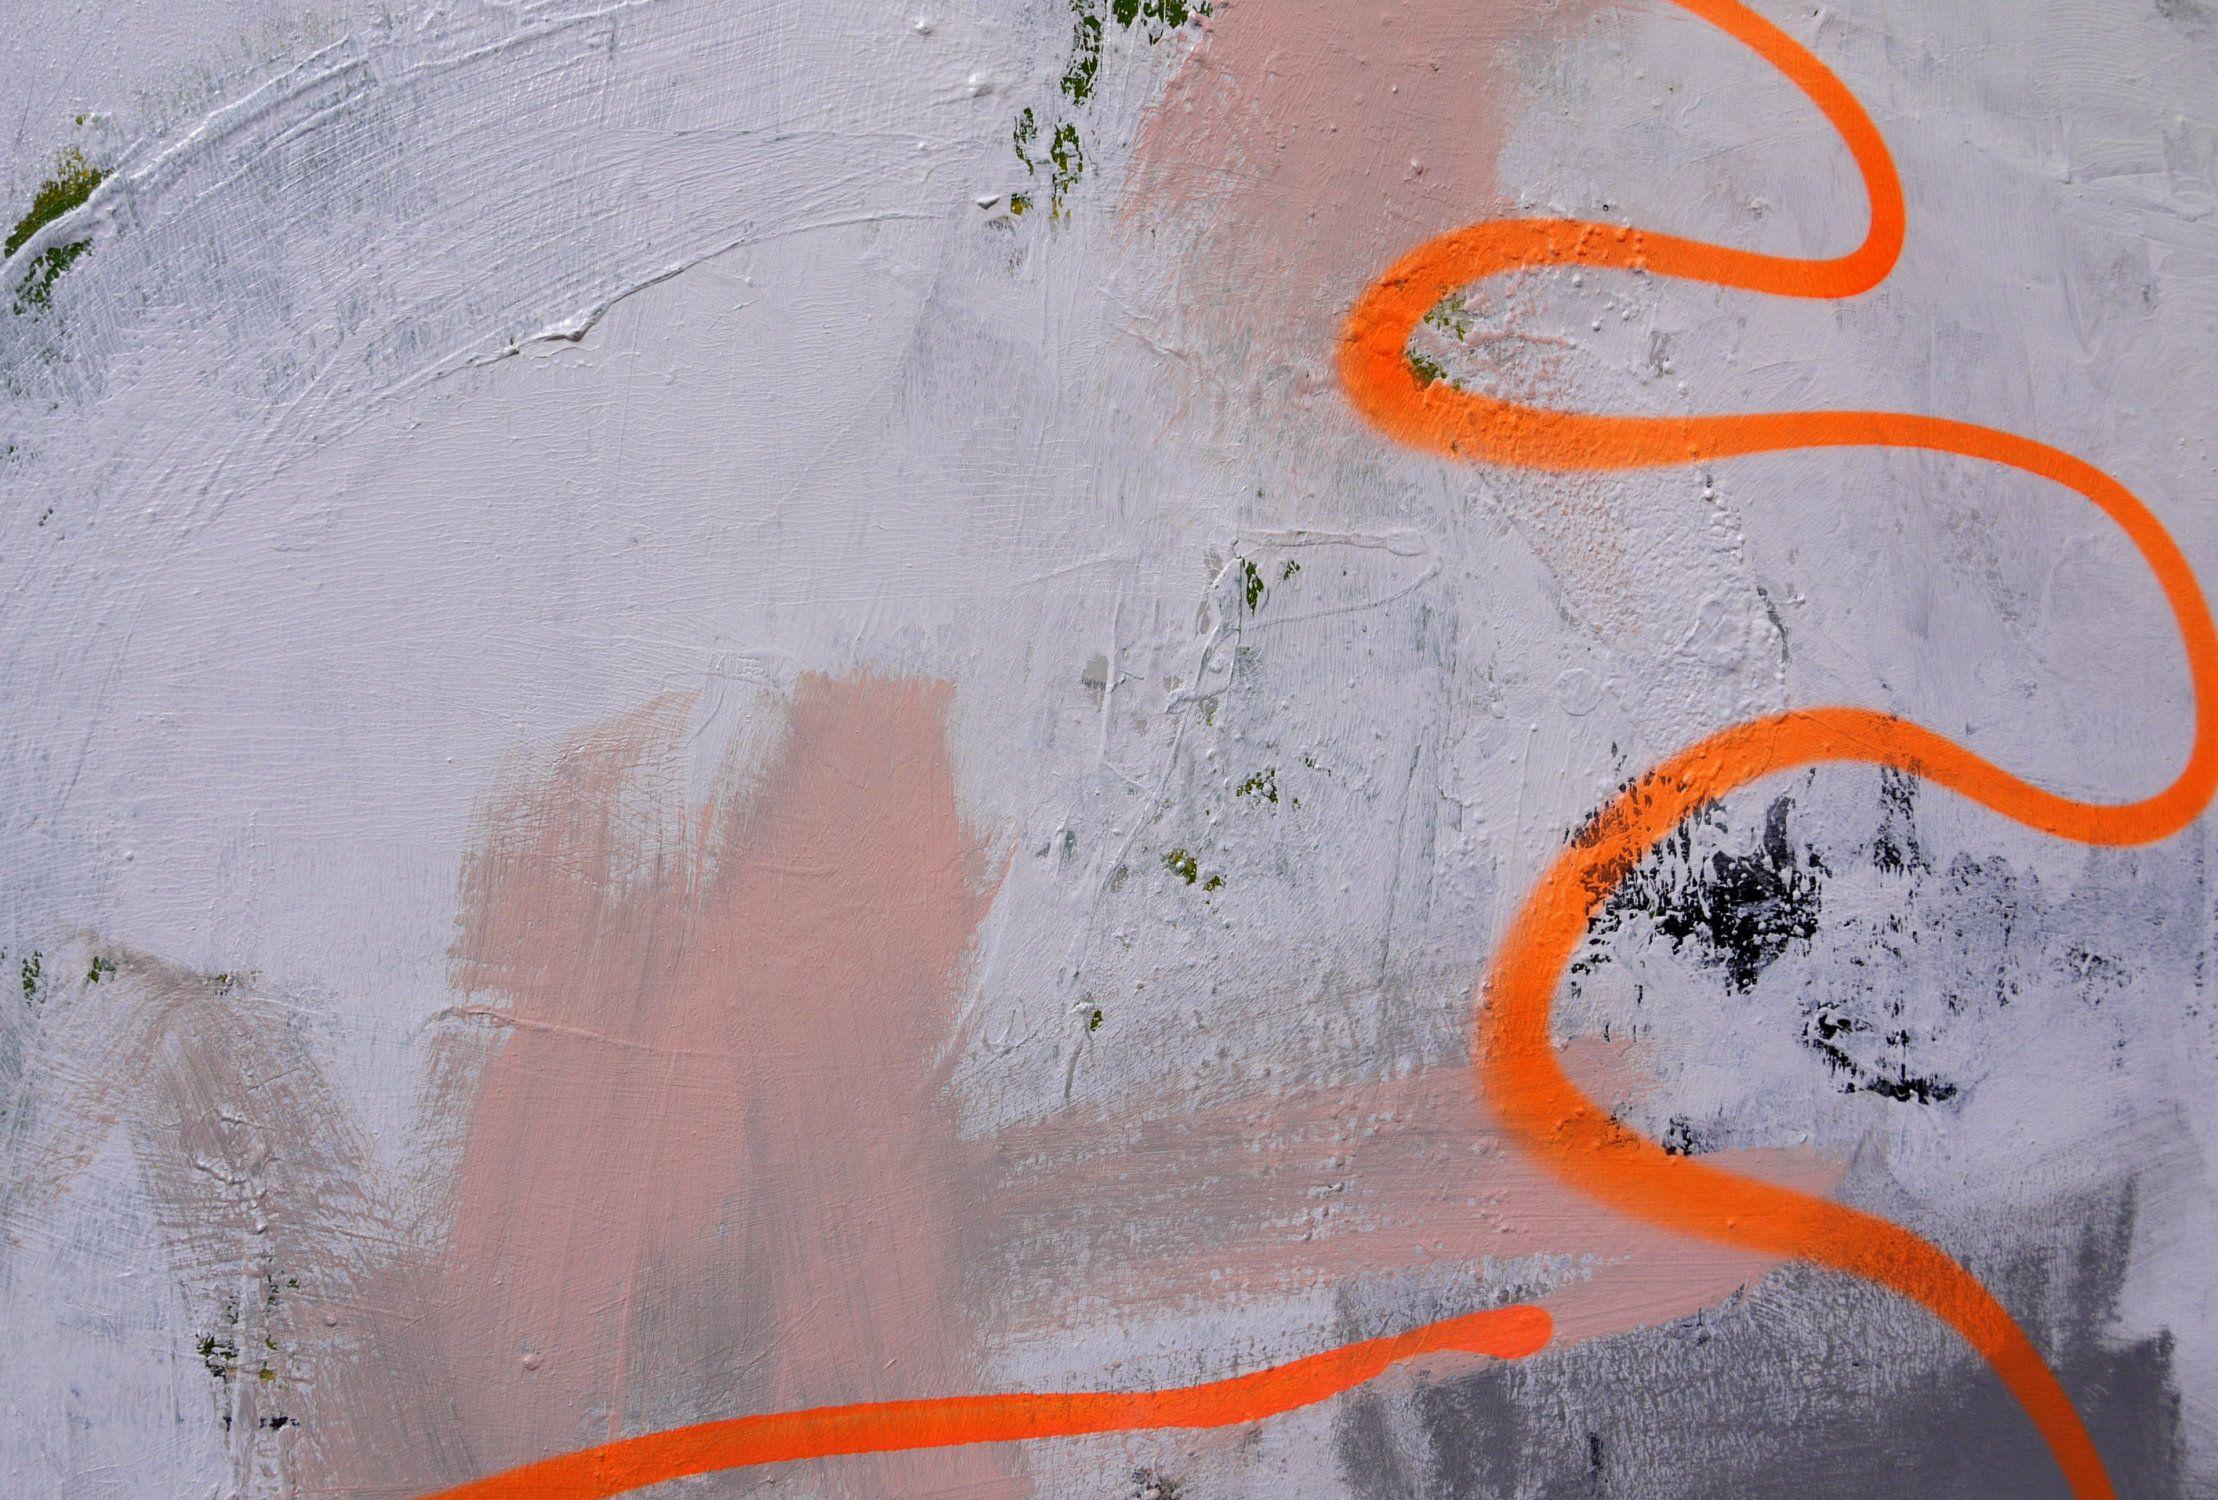 Drift Line (orange), Painting, Acrylic on Canvas - Gray Abstract Painting by Daniela Schweinsberg